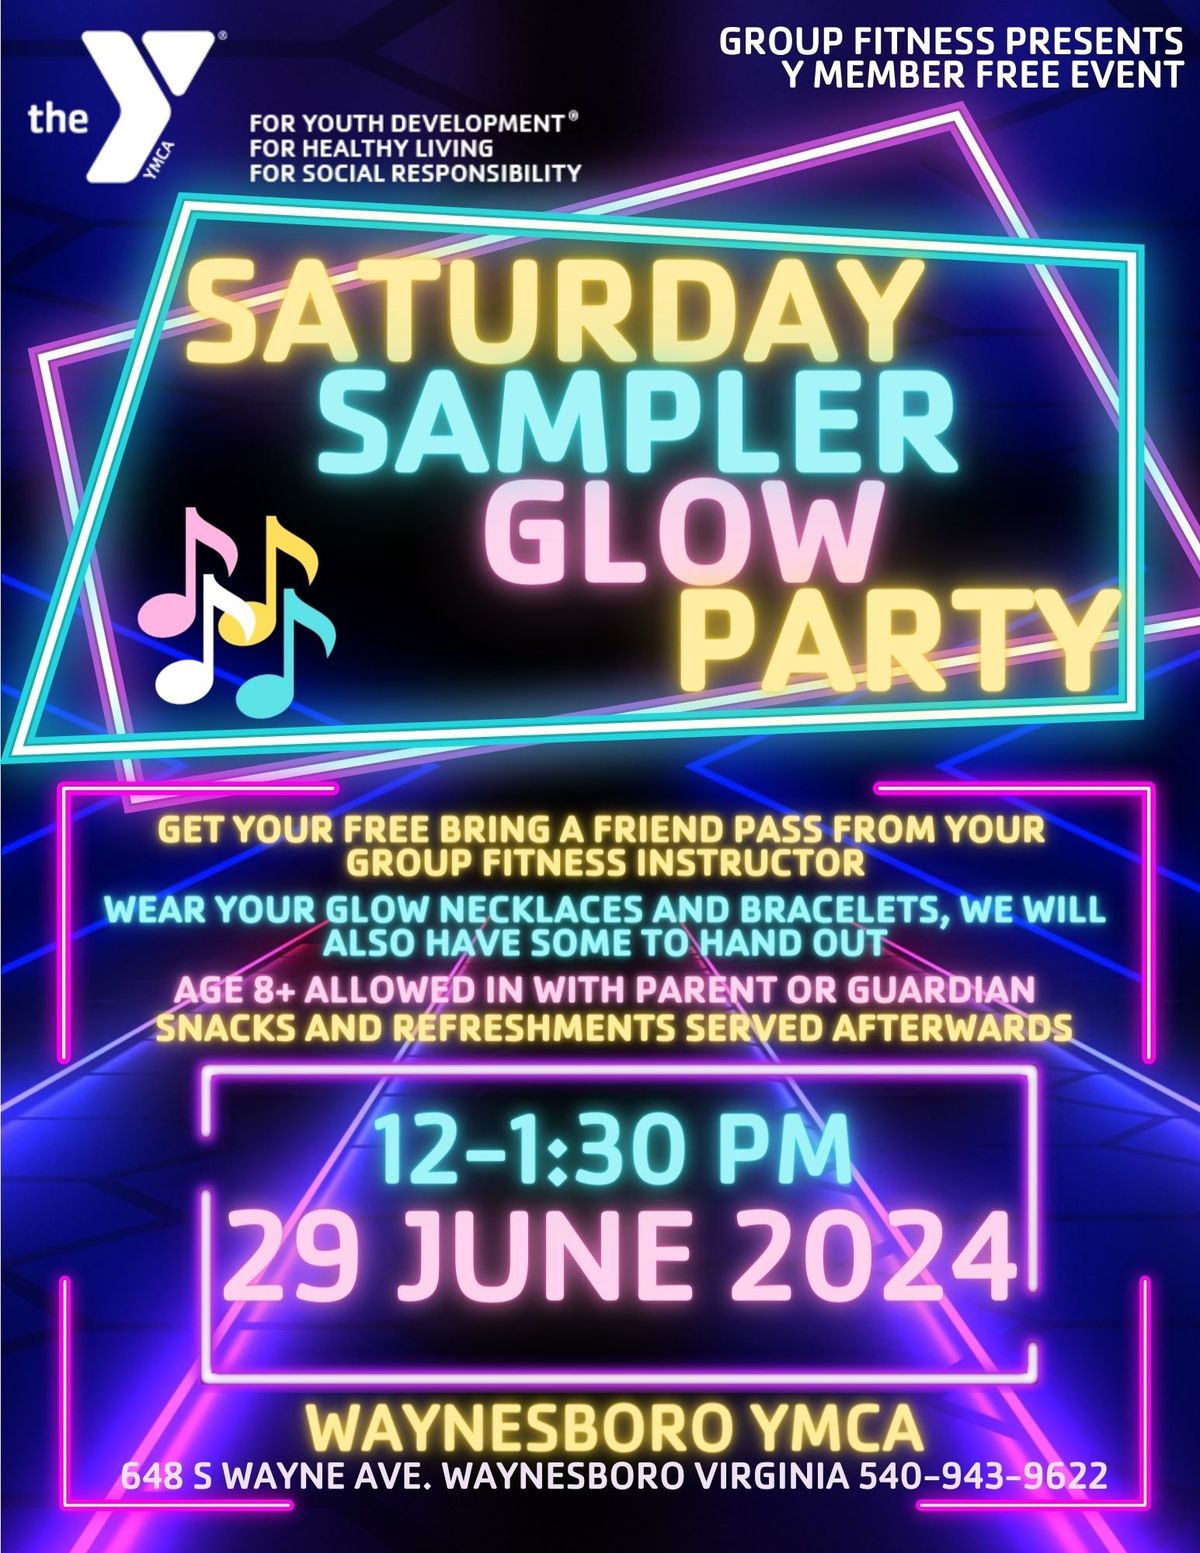 Saturday Sampler Glow Party and Bring A Friend